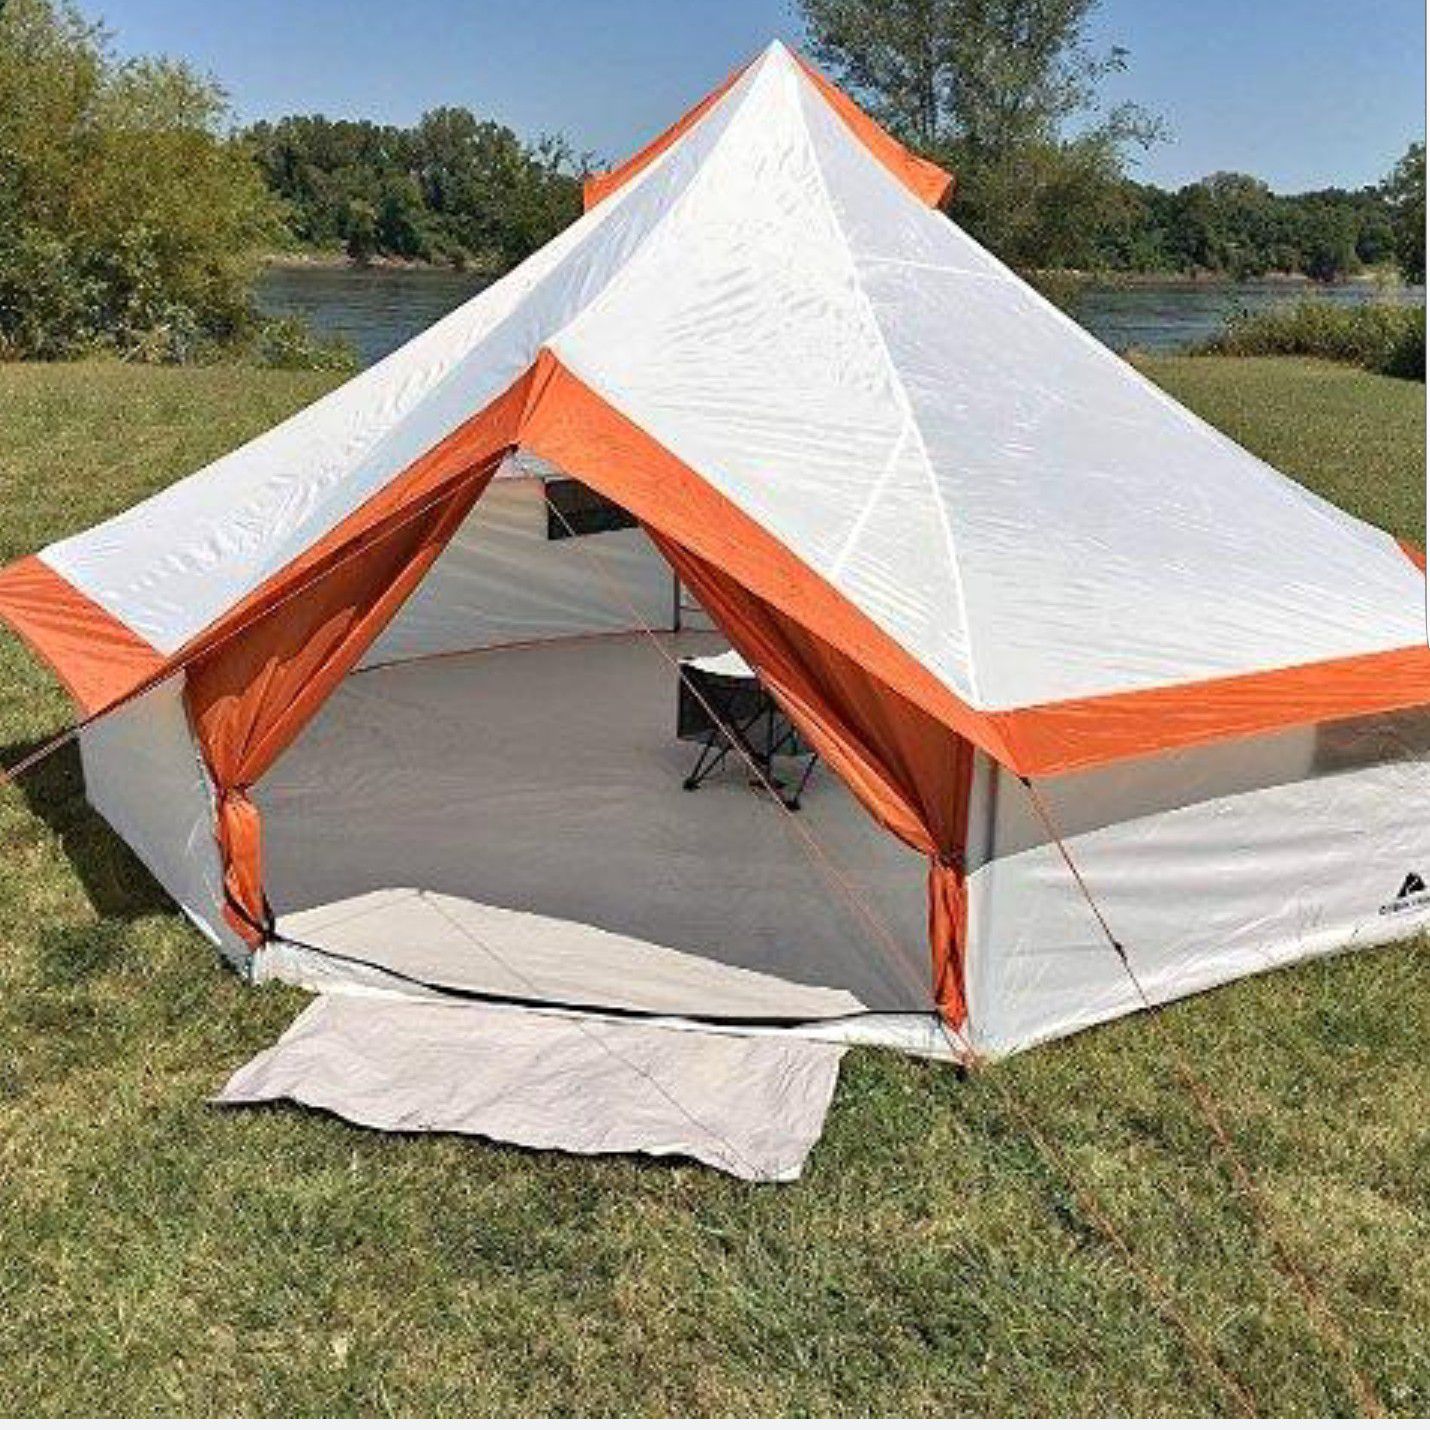 8 Person Large Tent, Camping, Backpacking, Family Outings, Events, Picnics. New